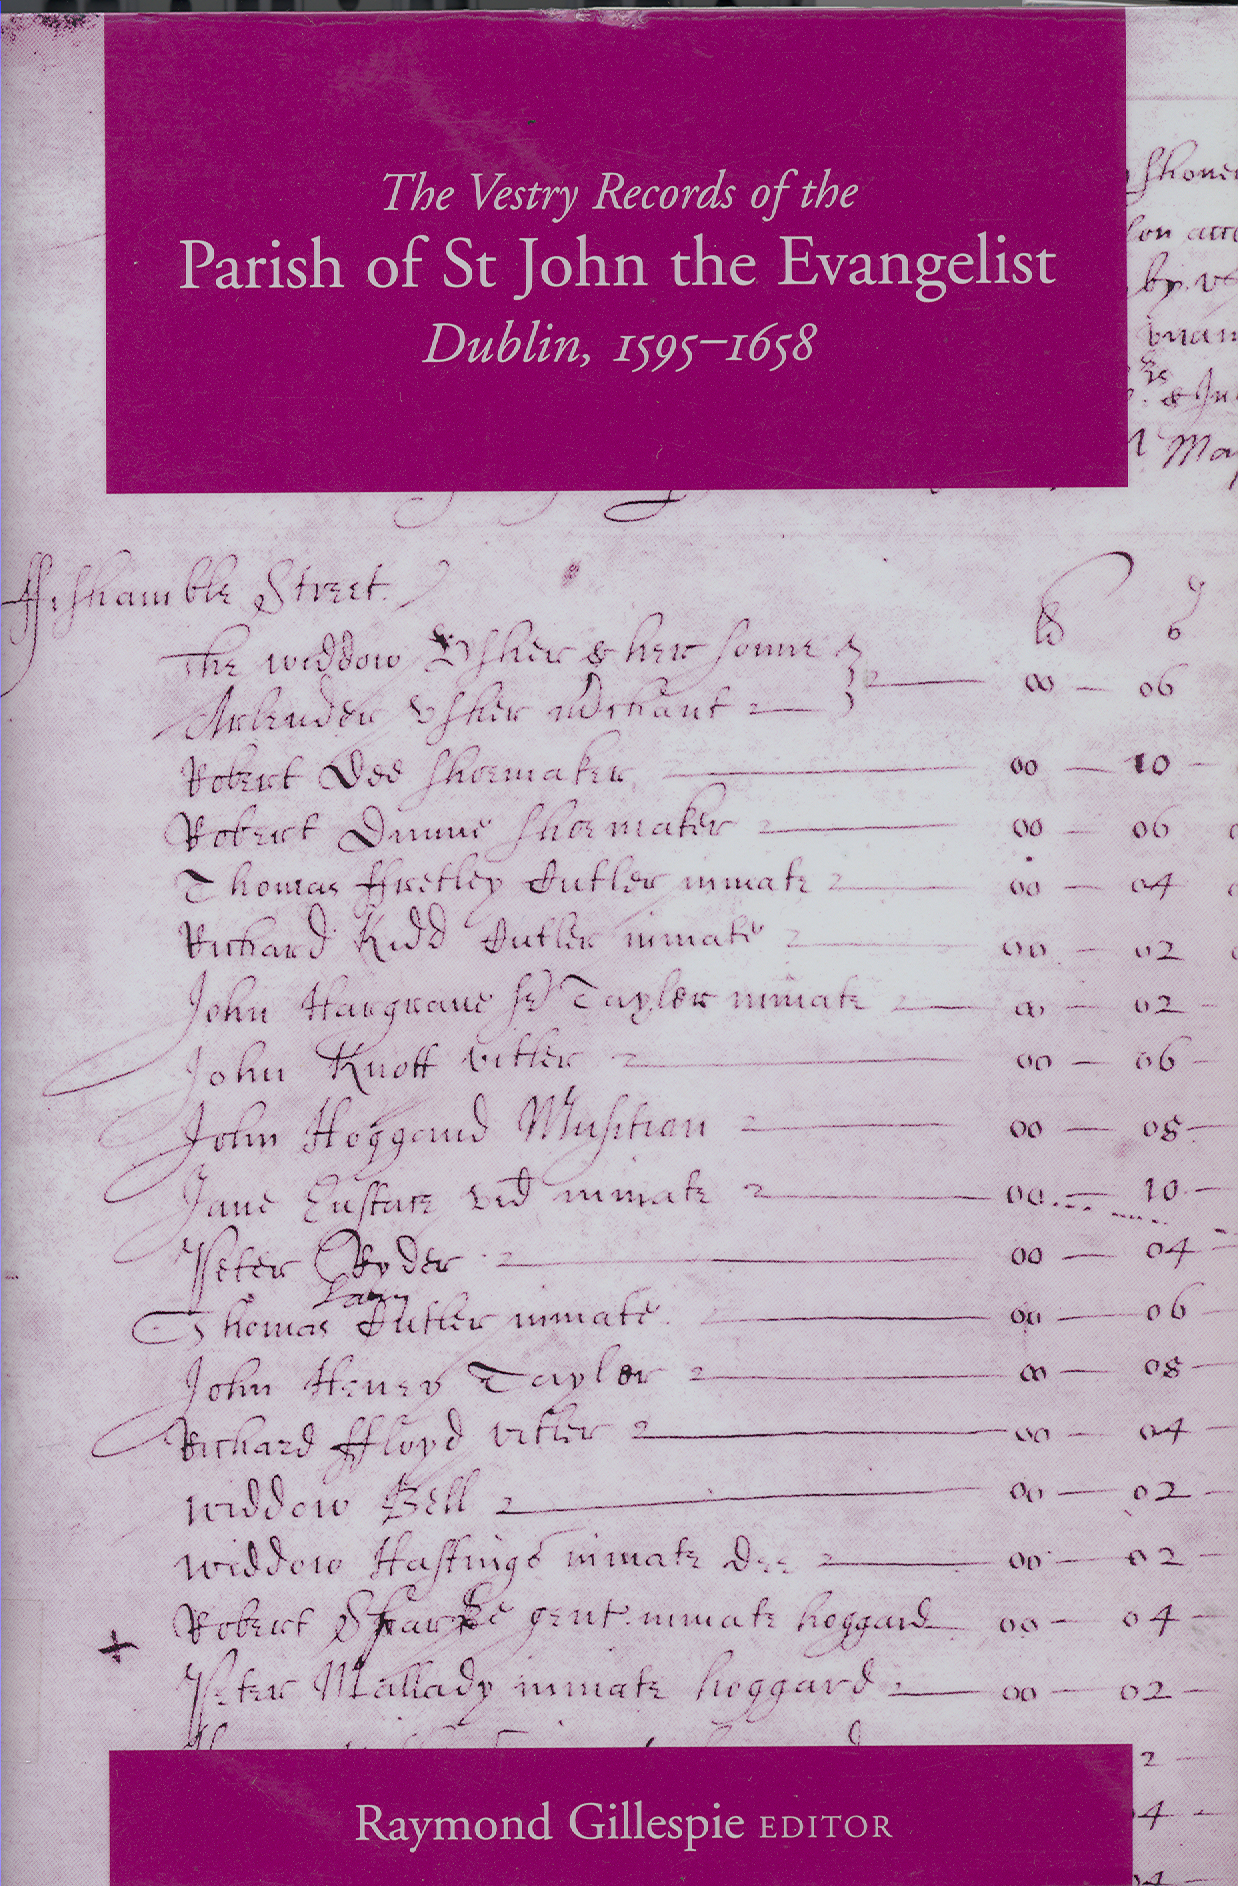 The Vestry Records of the Parish of St John the Evangelist, Dublin 1595-1658 edited by Raymond Gillespie (Dublin: Four Courts Press in association with the Representative Church Body Library, 2002).